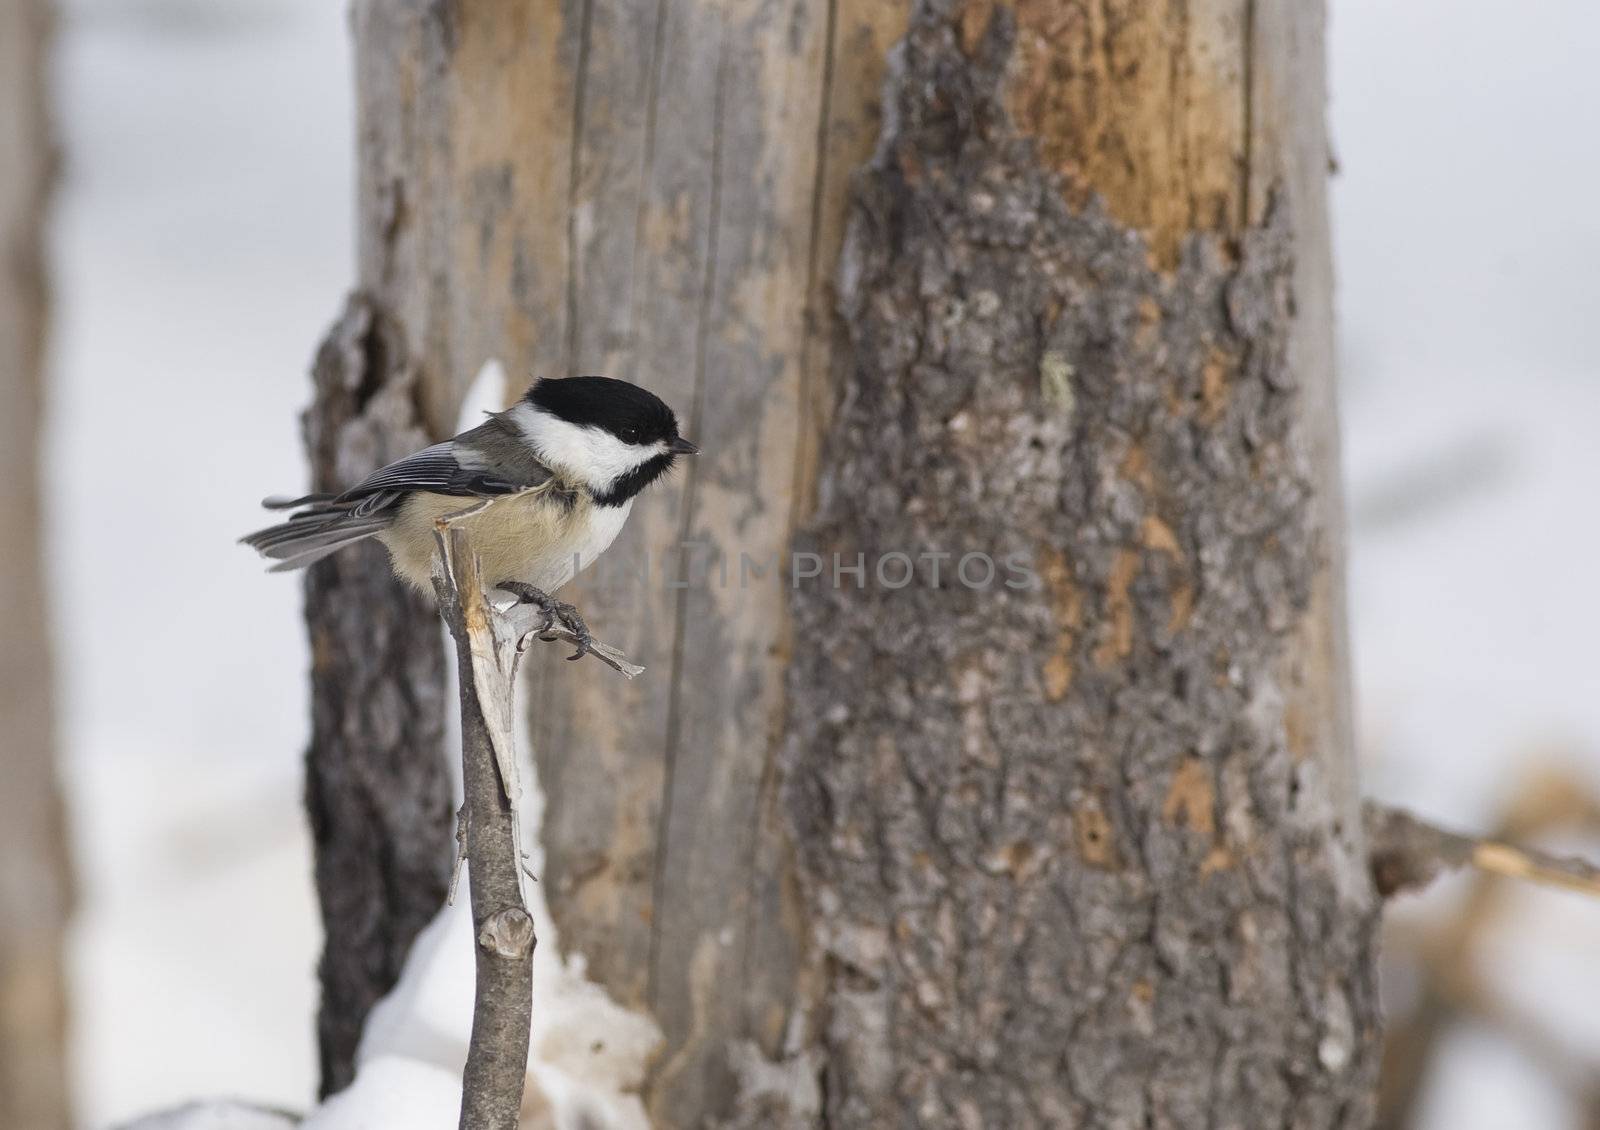 Black Capped Chickadee ( Poecile atricapillus  order -  Passeriformes family - paridae ) perched on a small branch. This bird is the state bird of Maine and Massachusetts